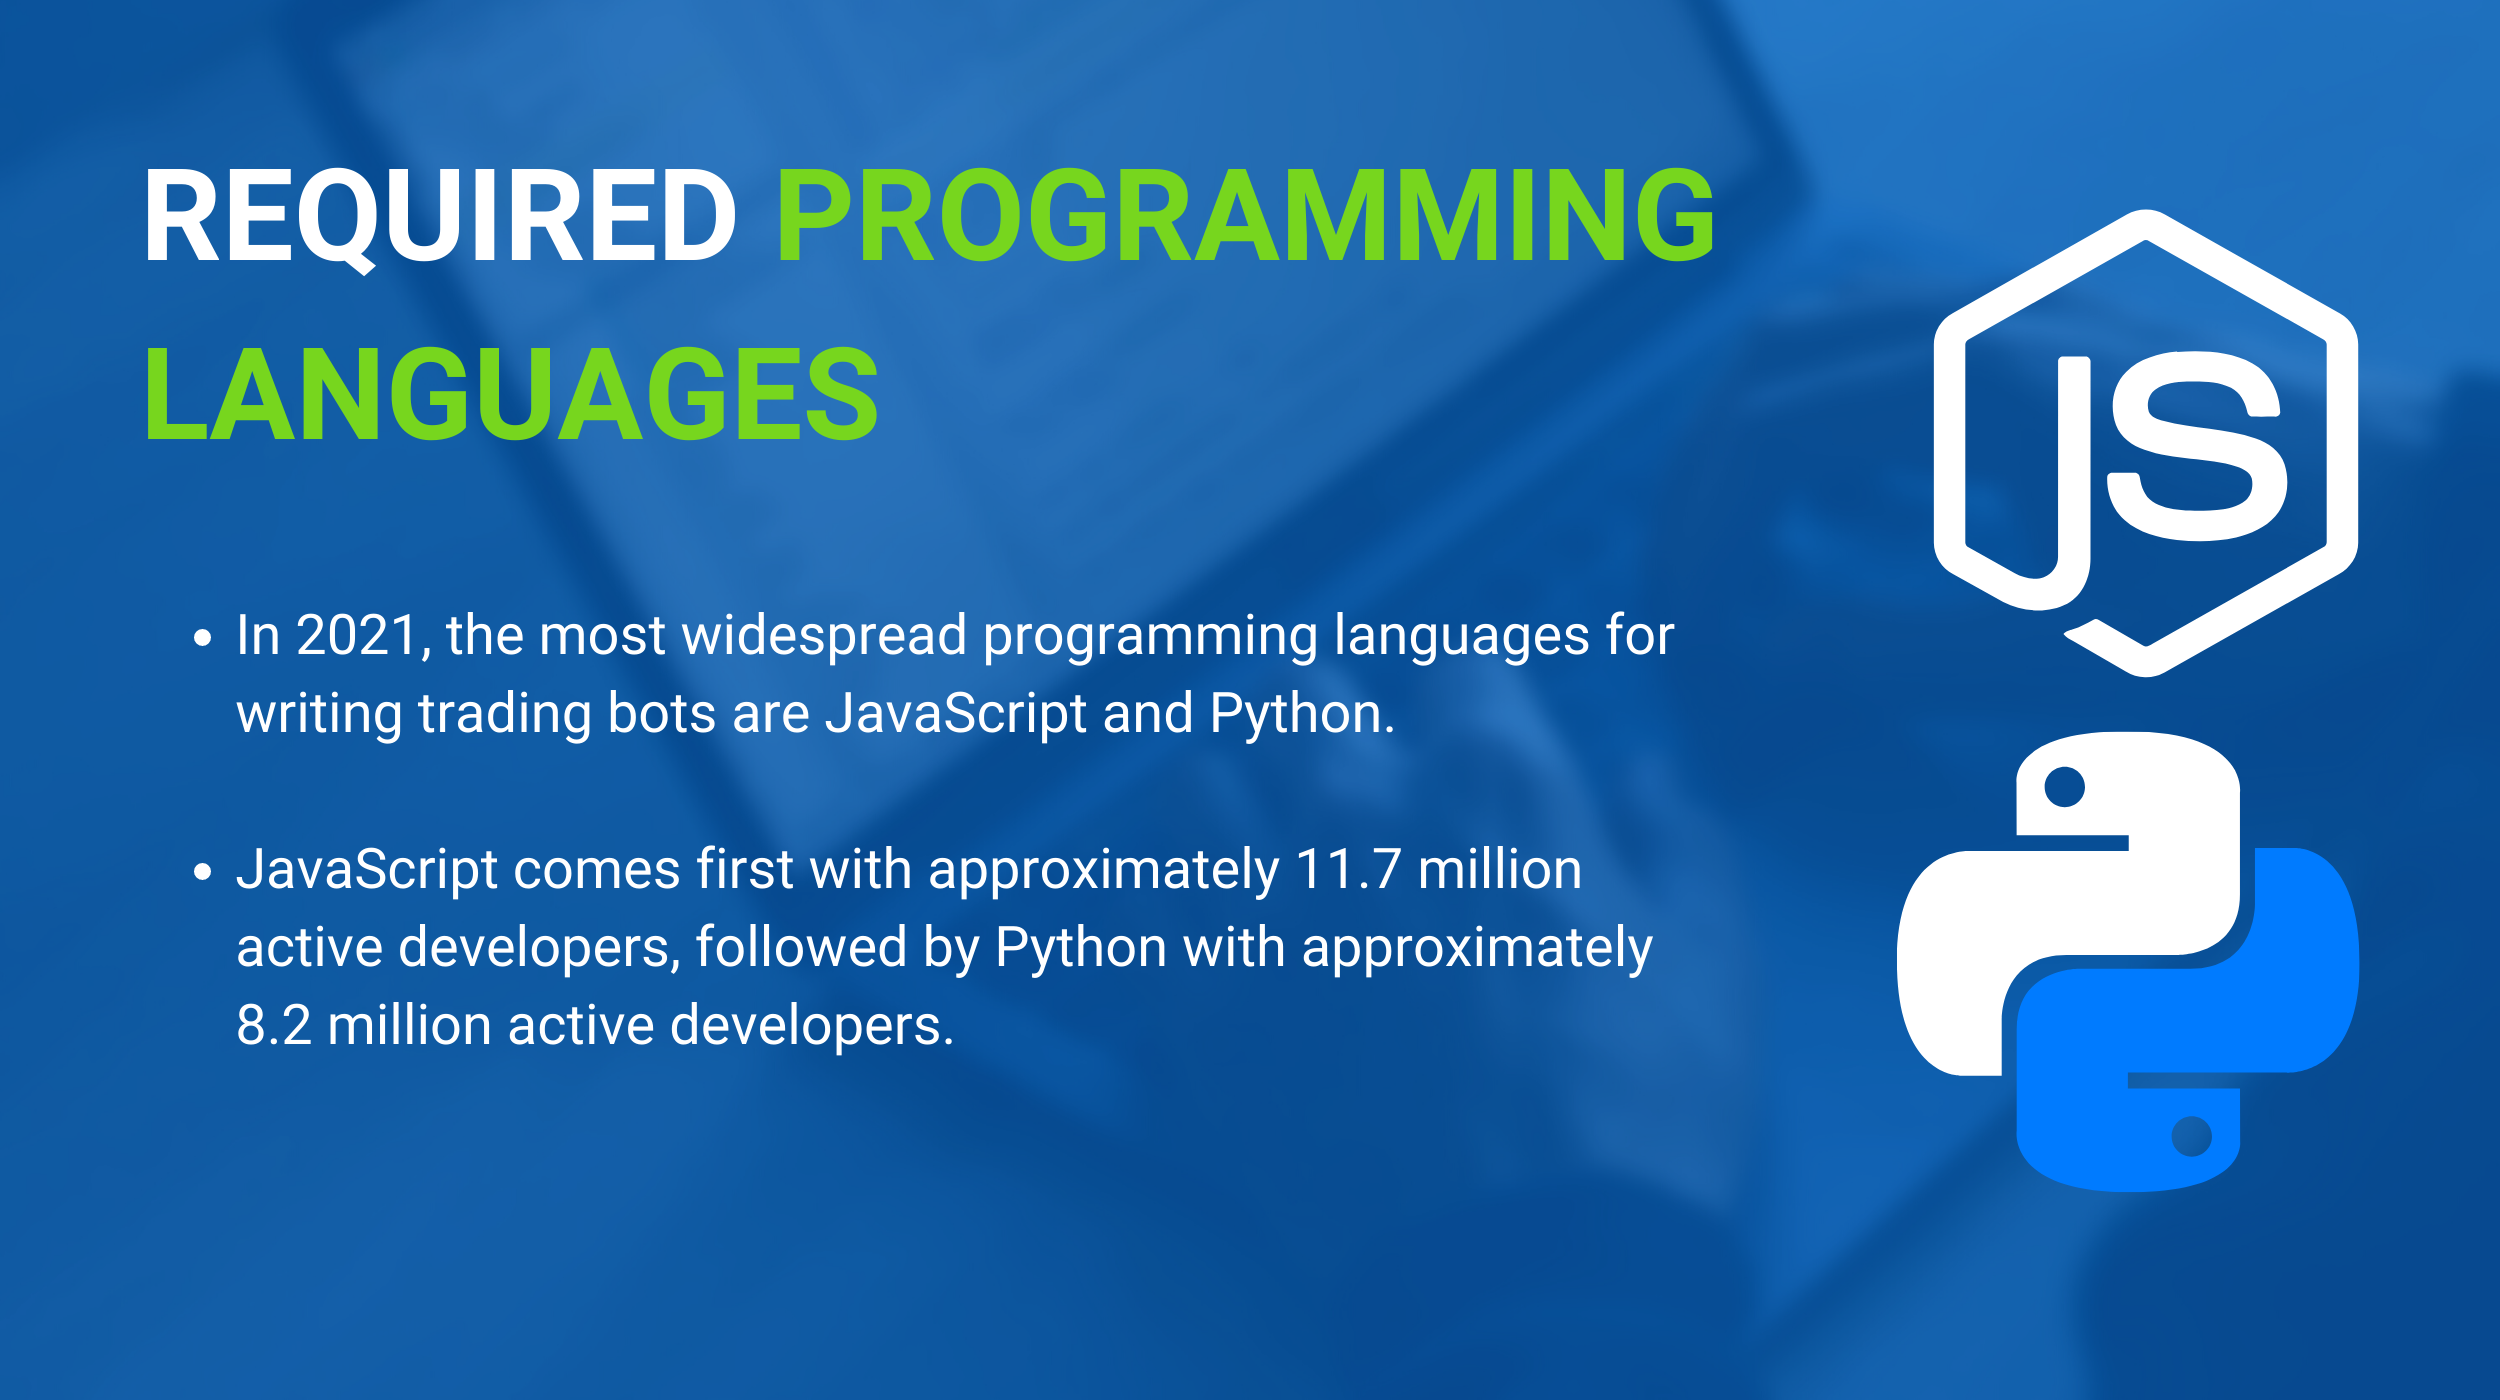 Required programming languages